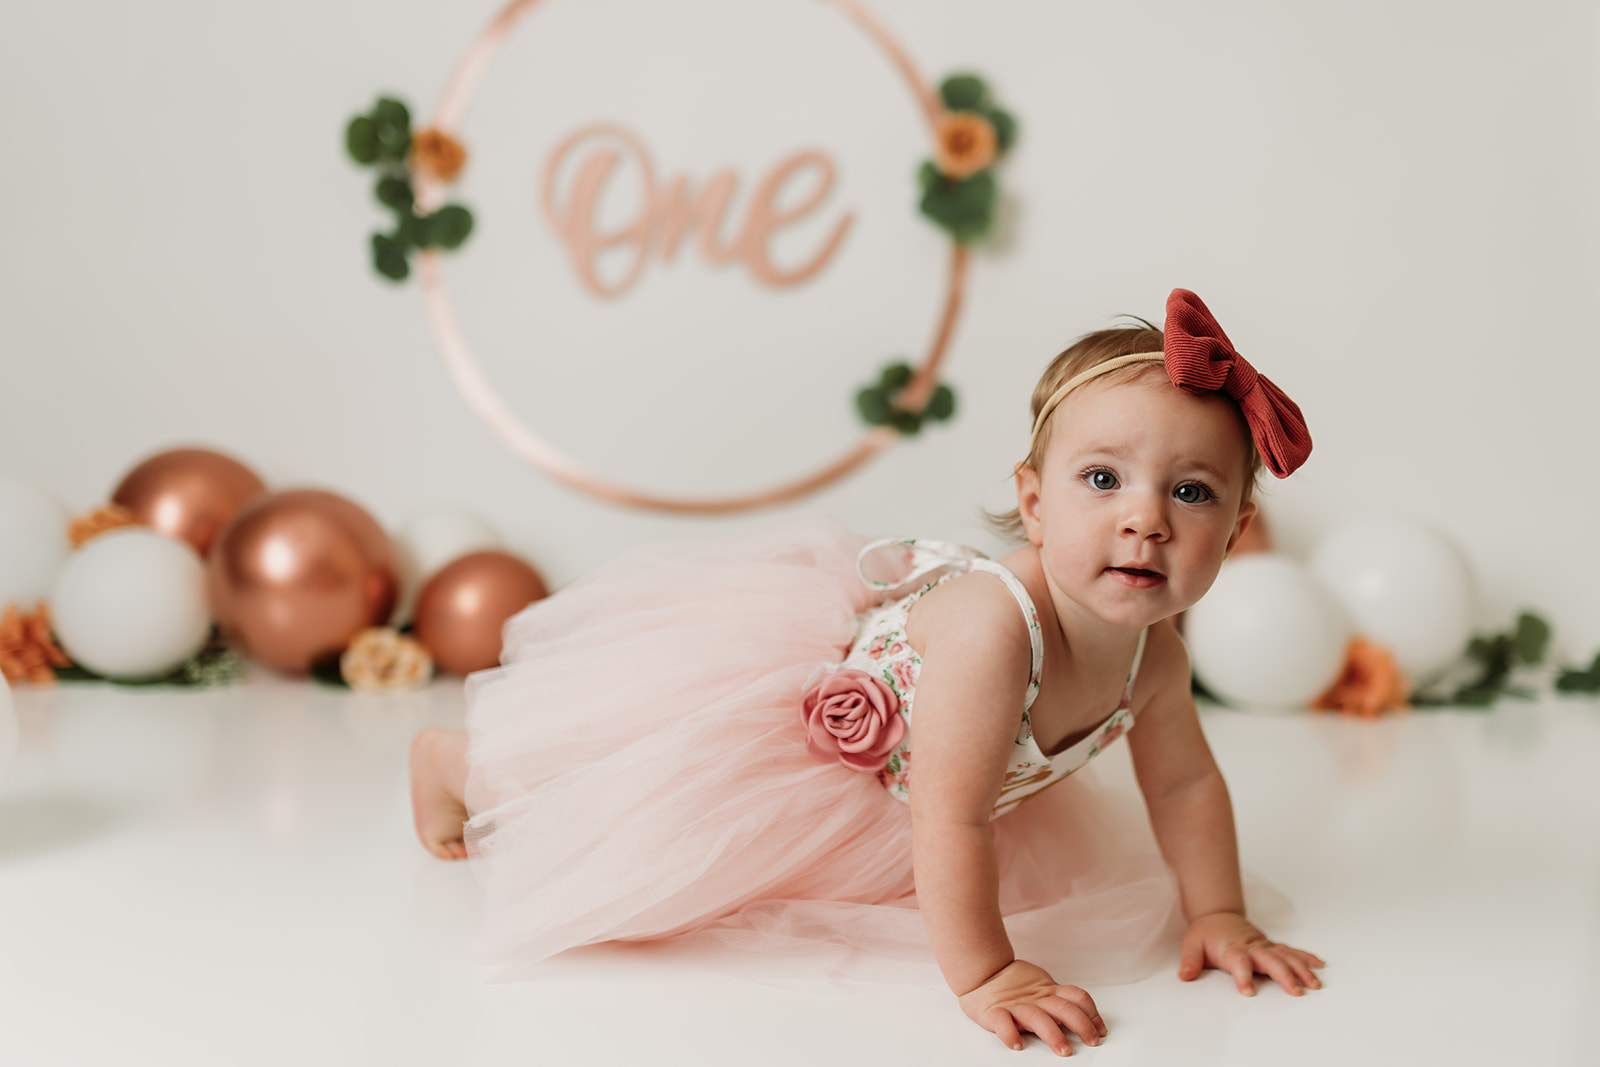 Simple cake smash session with Heather Ann Photography